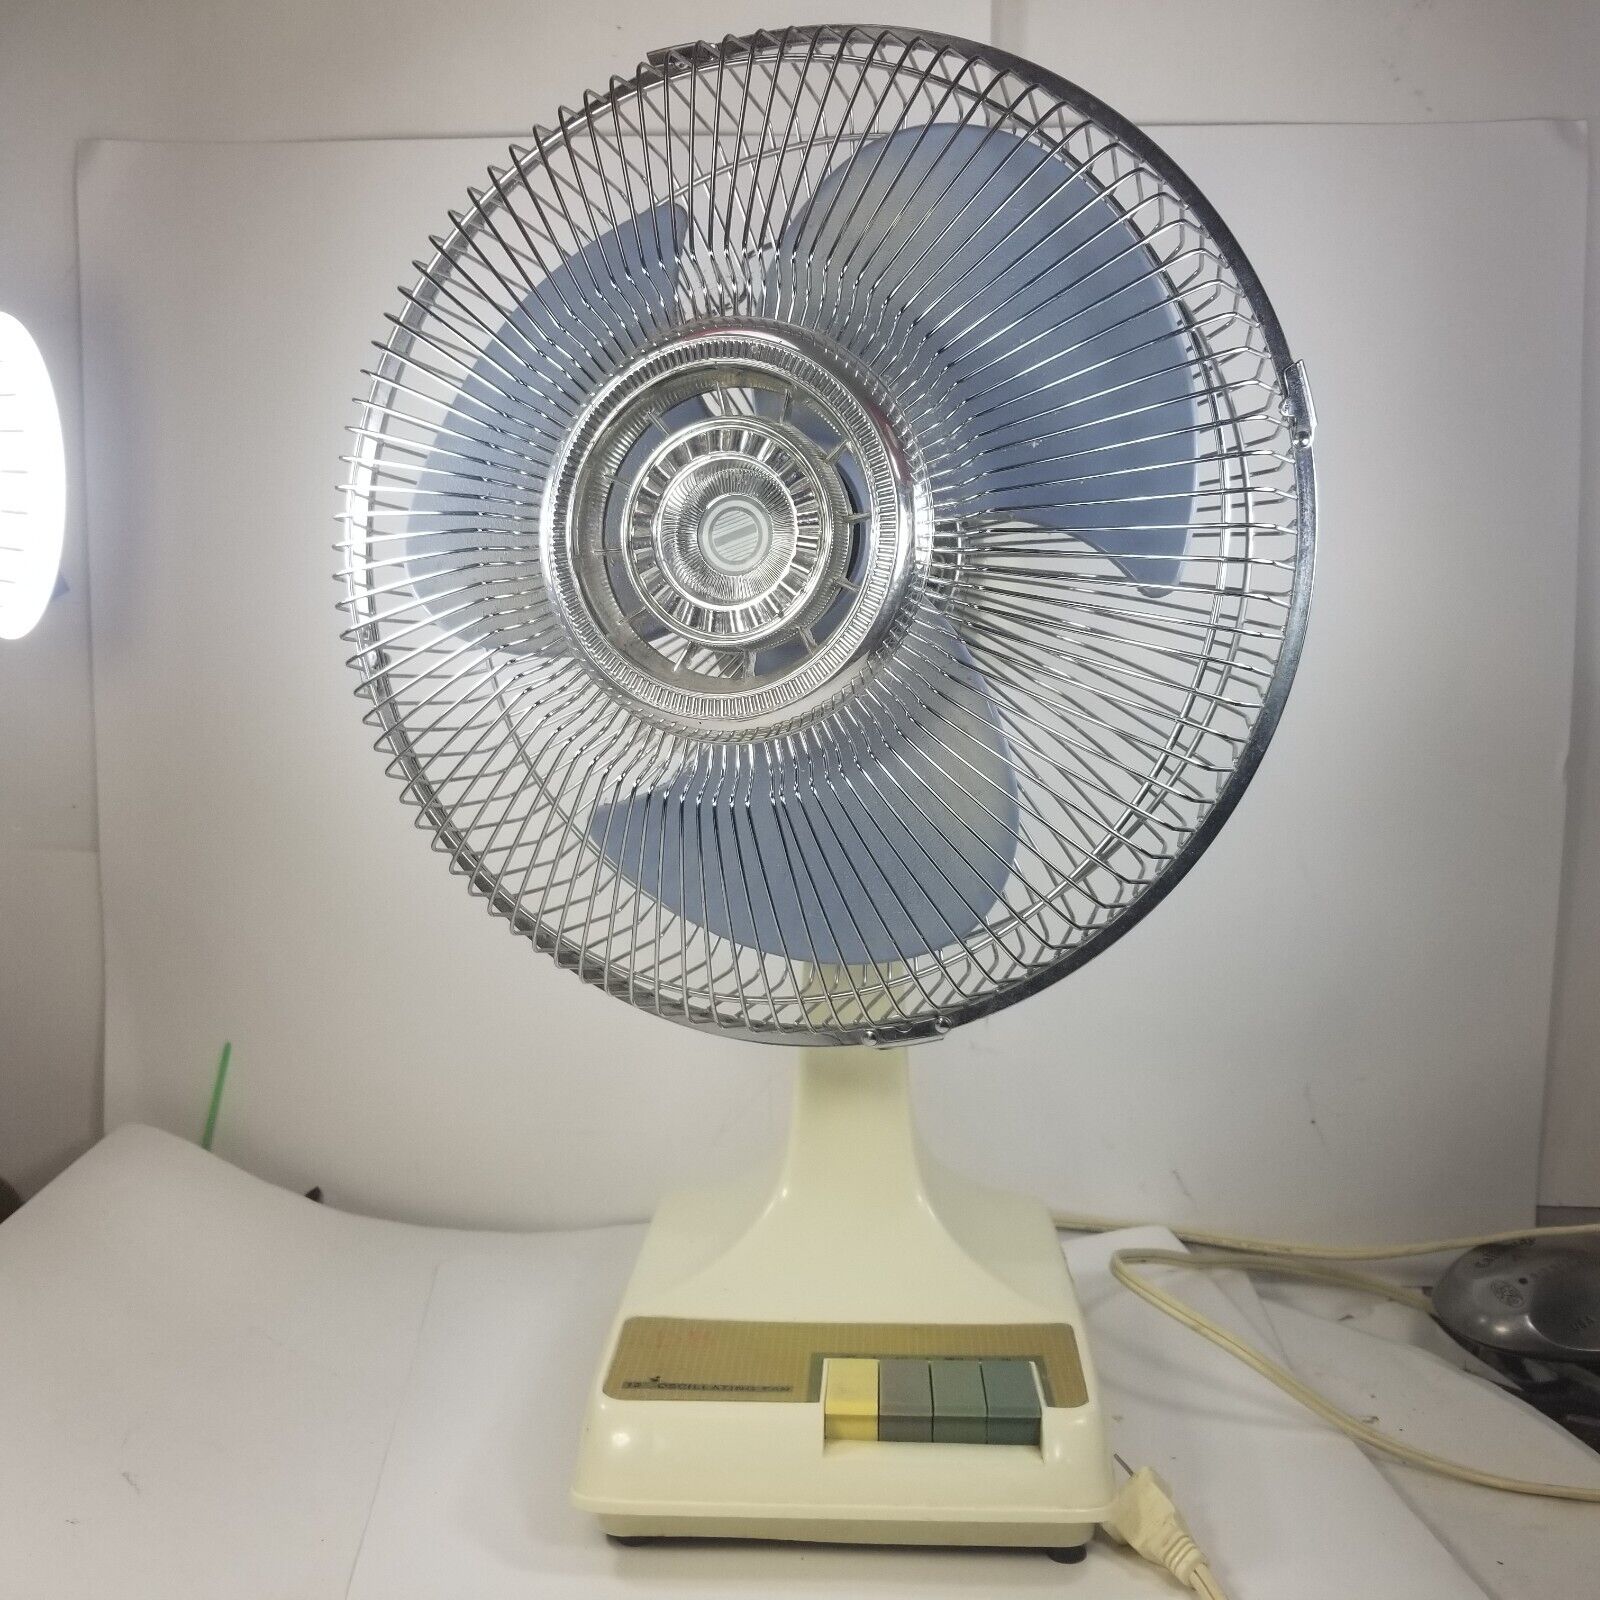 Vintage Kuo Horn Desk Table Oscillating 12 Inch 3 Speed Fan KH-203-BL Blue Blade